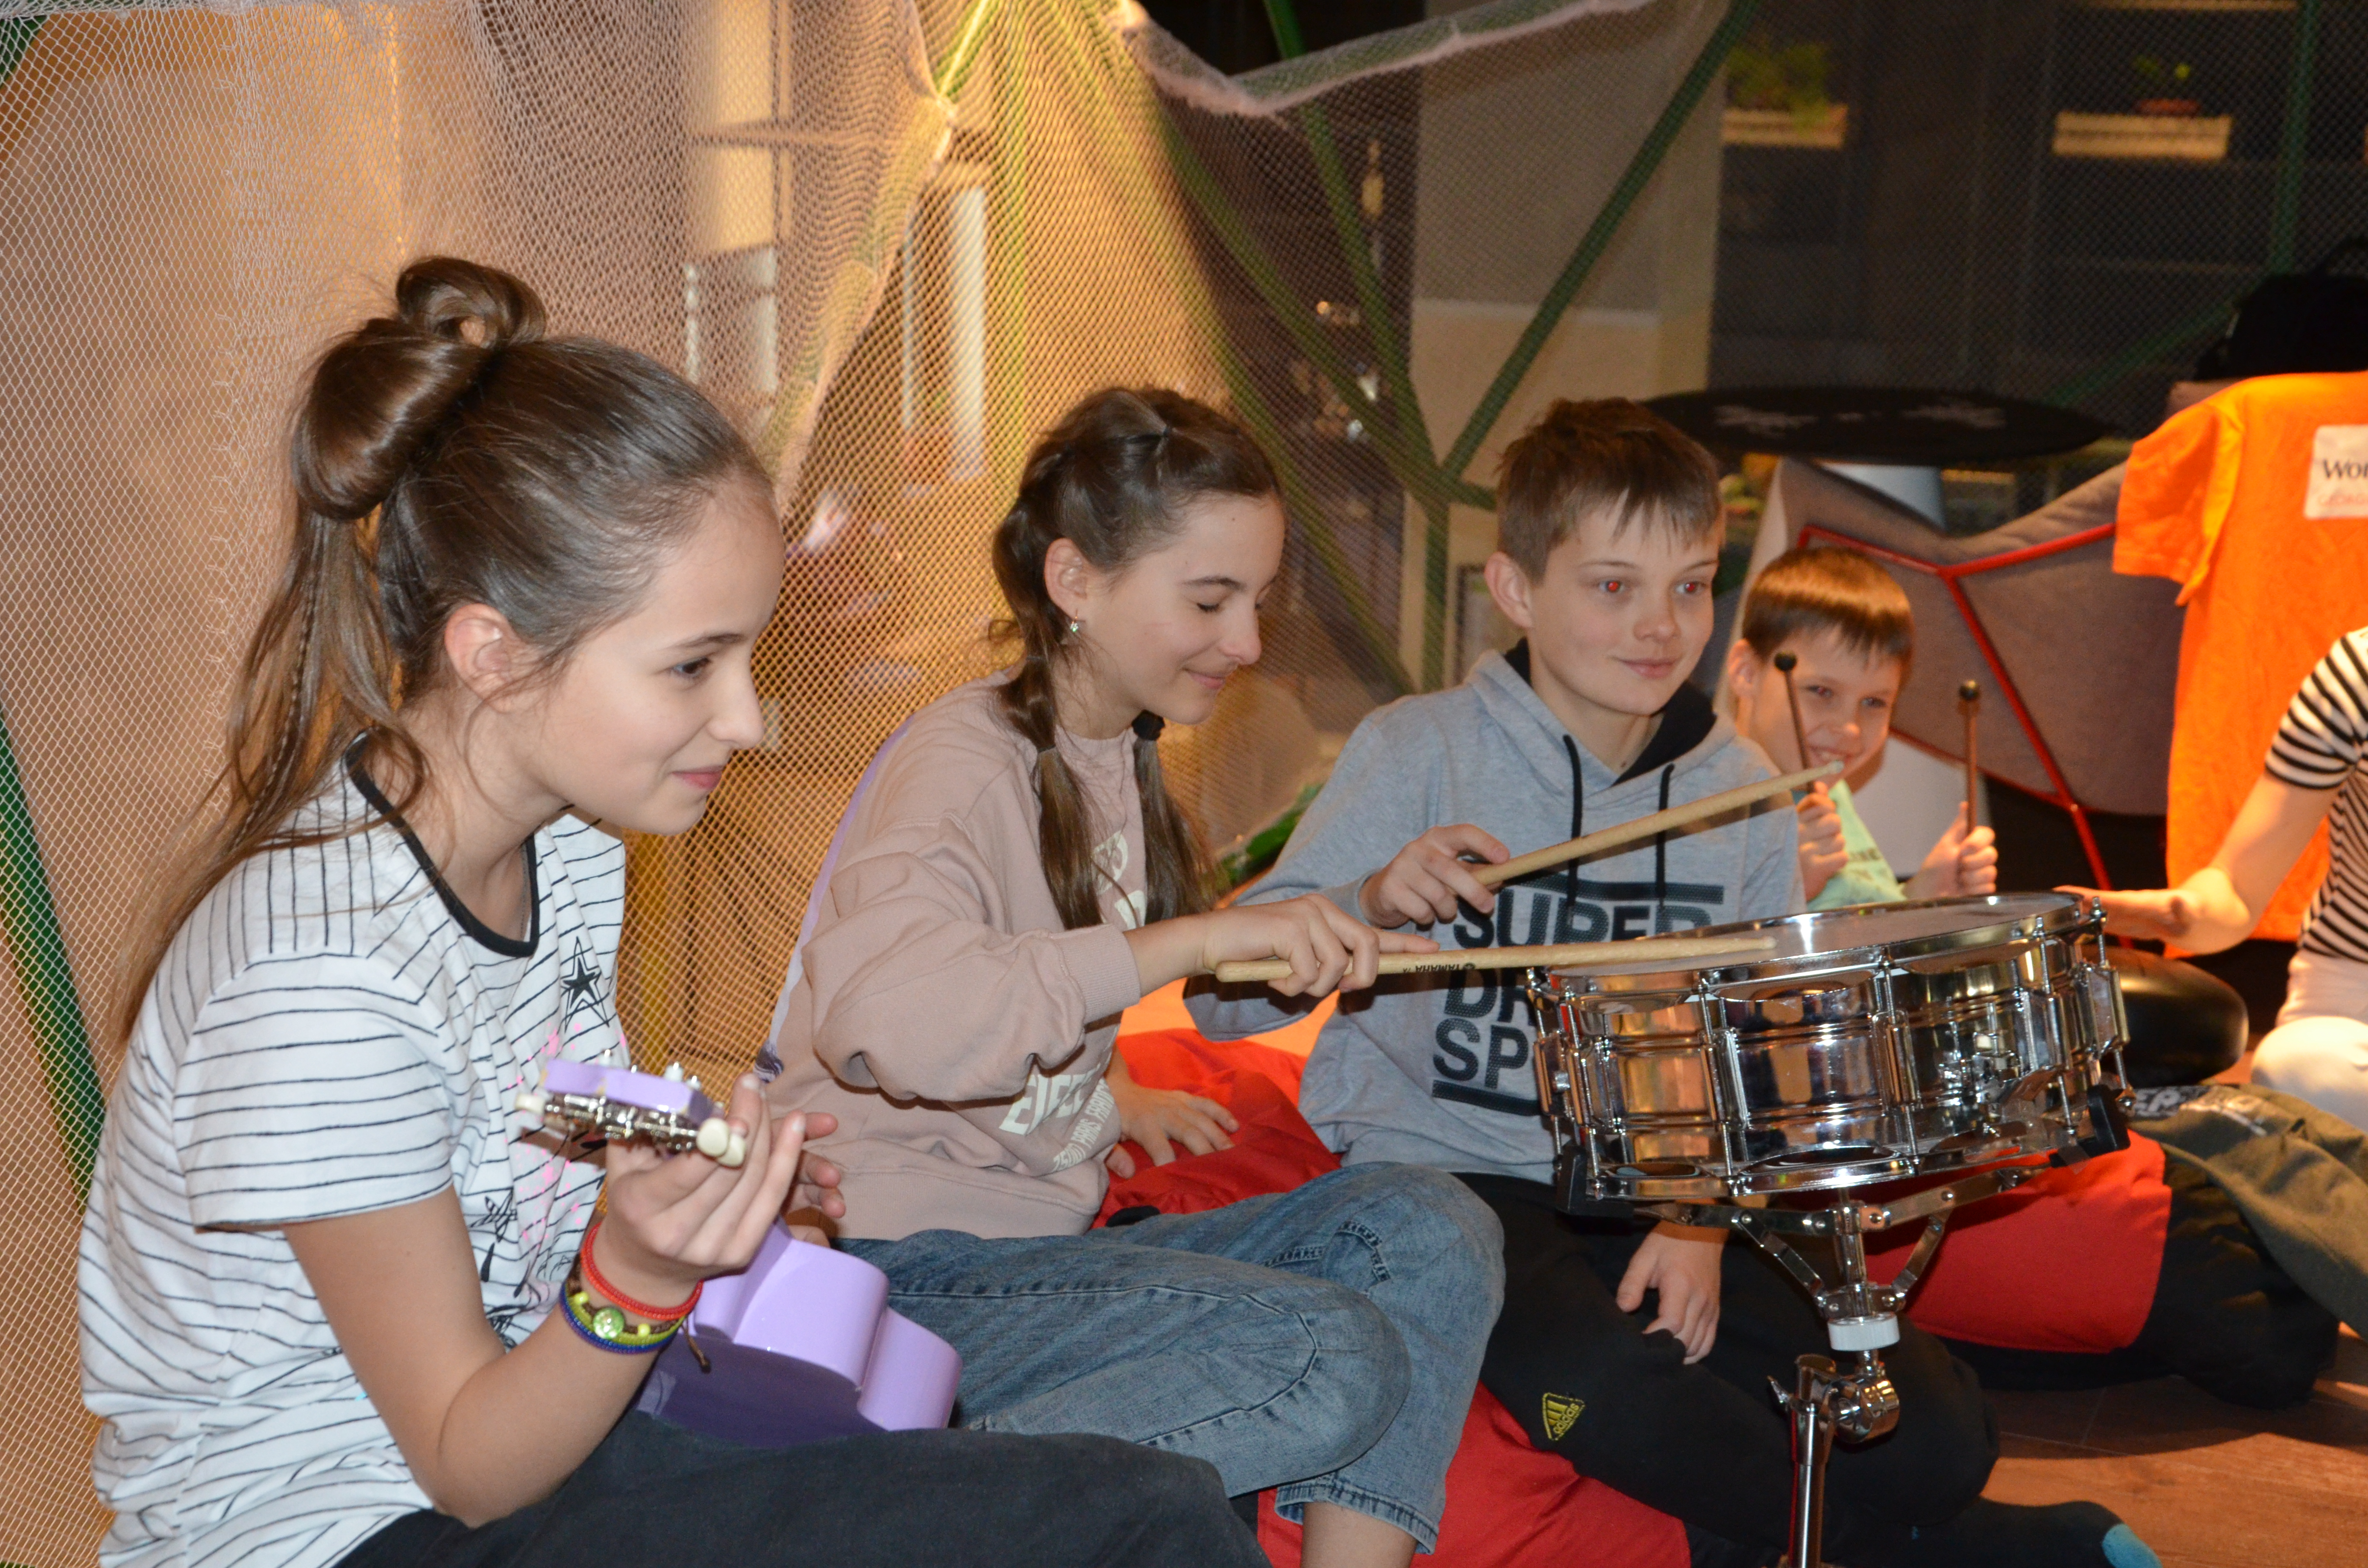 Children from Ukraine take part in a music therapy session